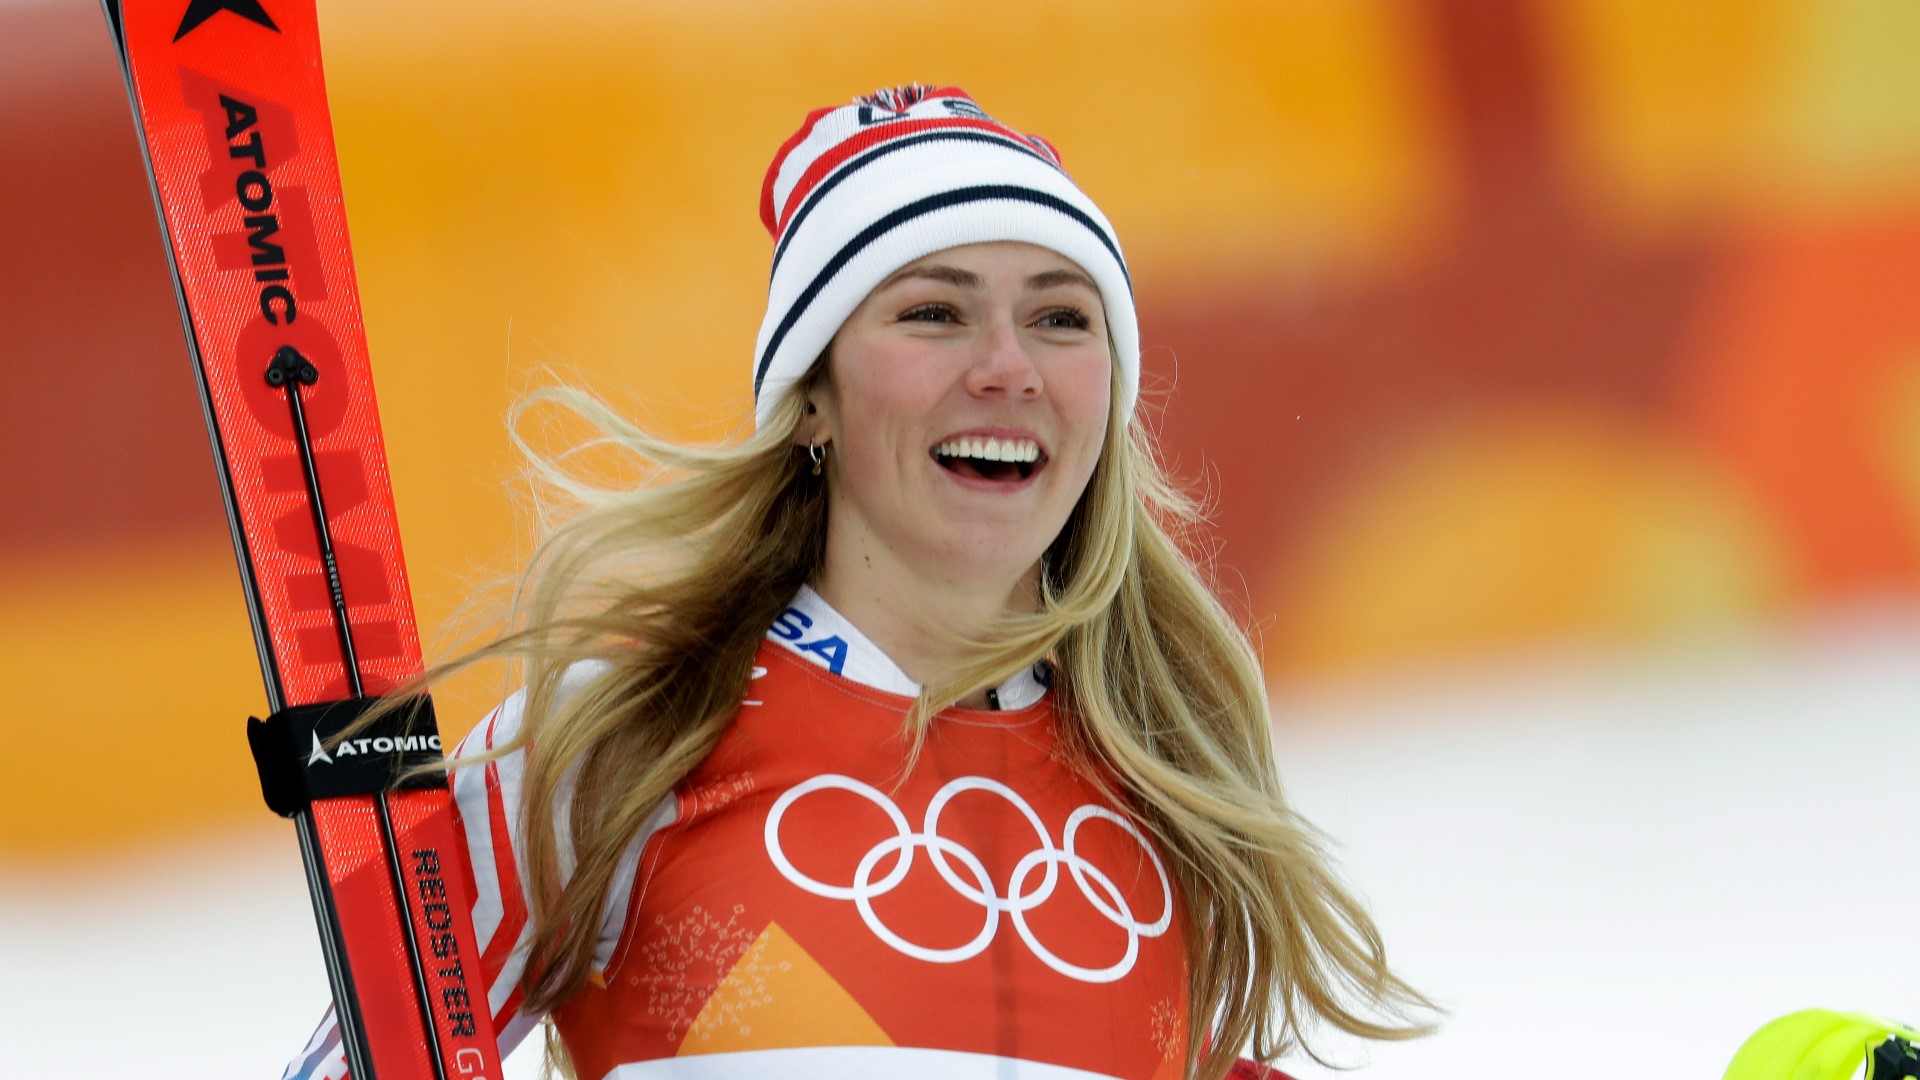 The pro skier is an American two-time Olympic Gold Medalist.